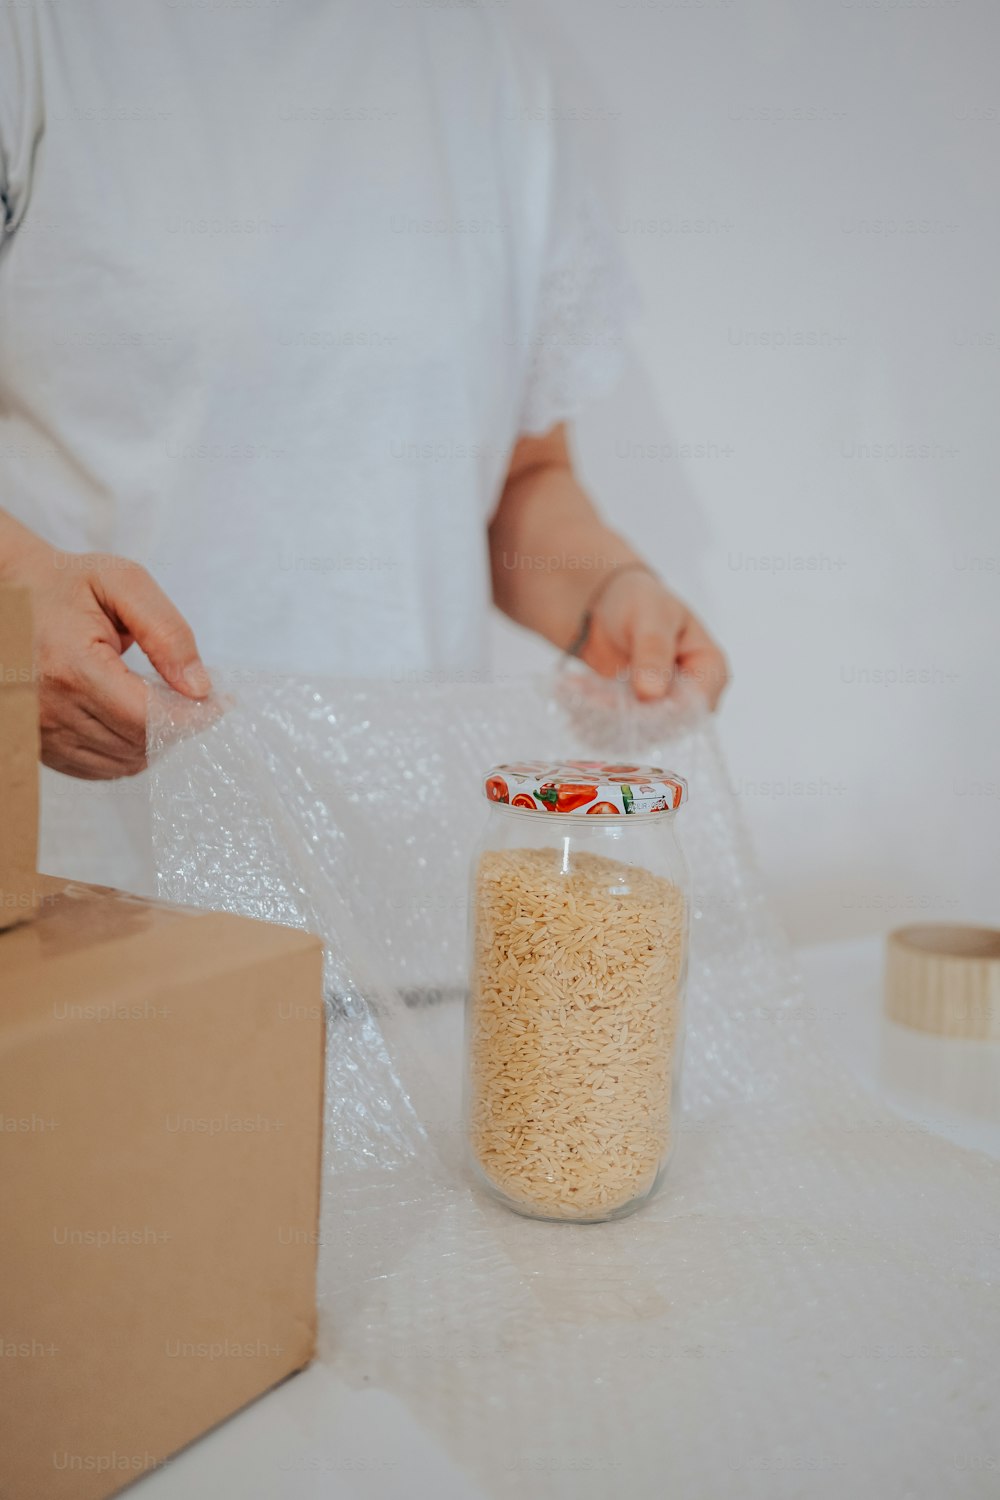 a person holding a plastic bag over a jar of food